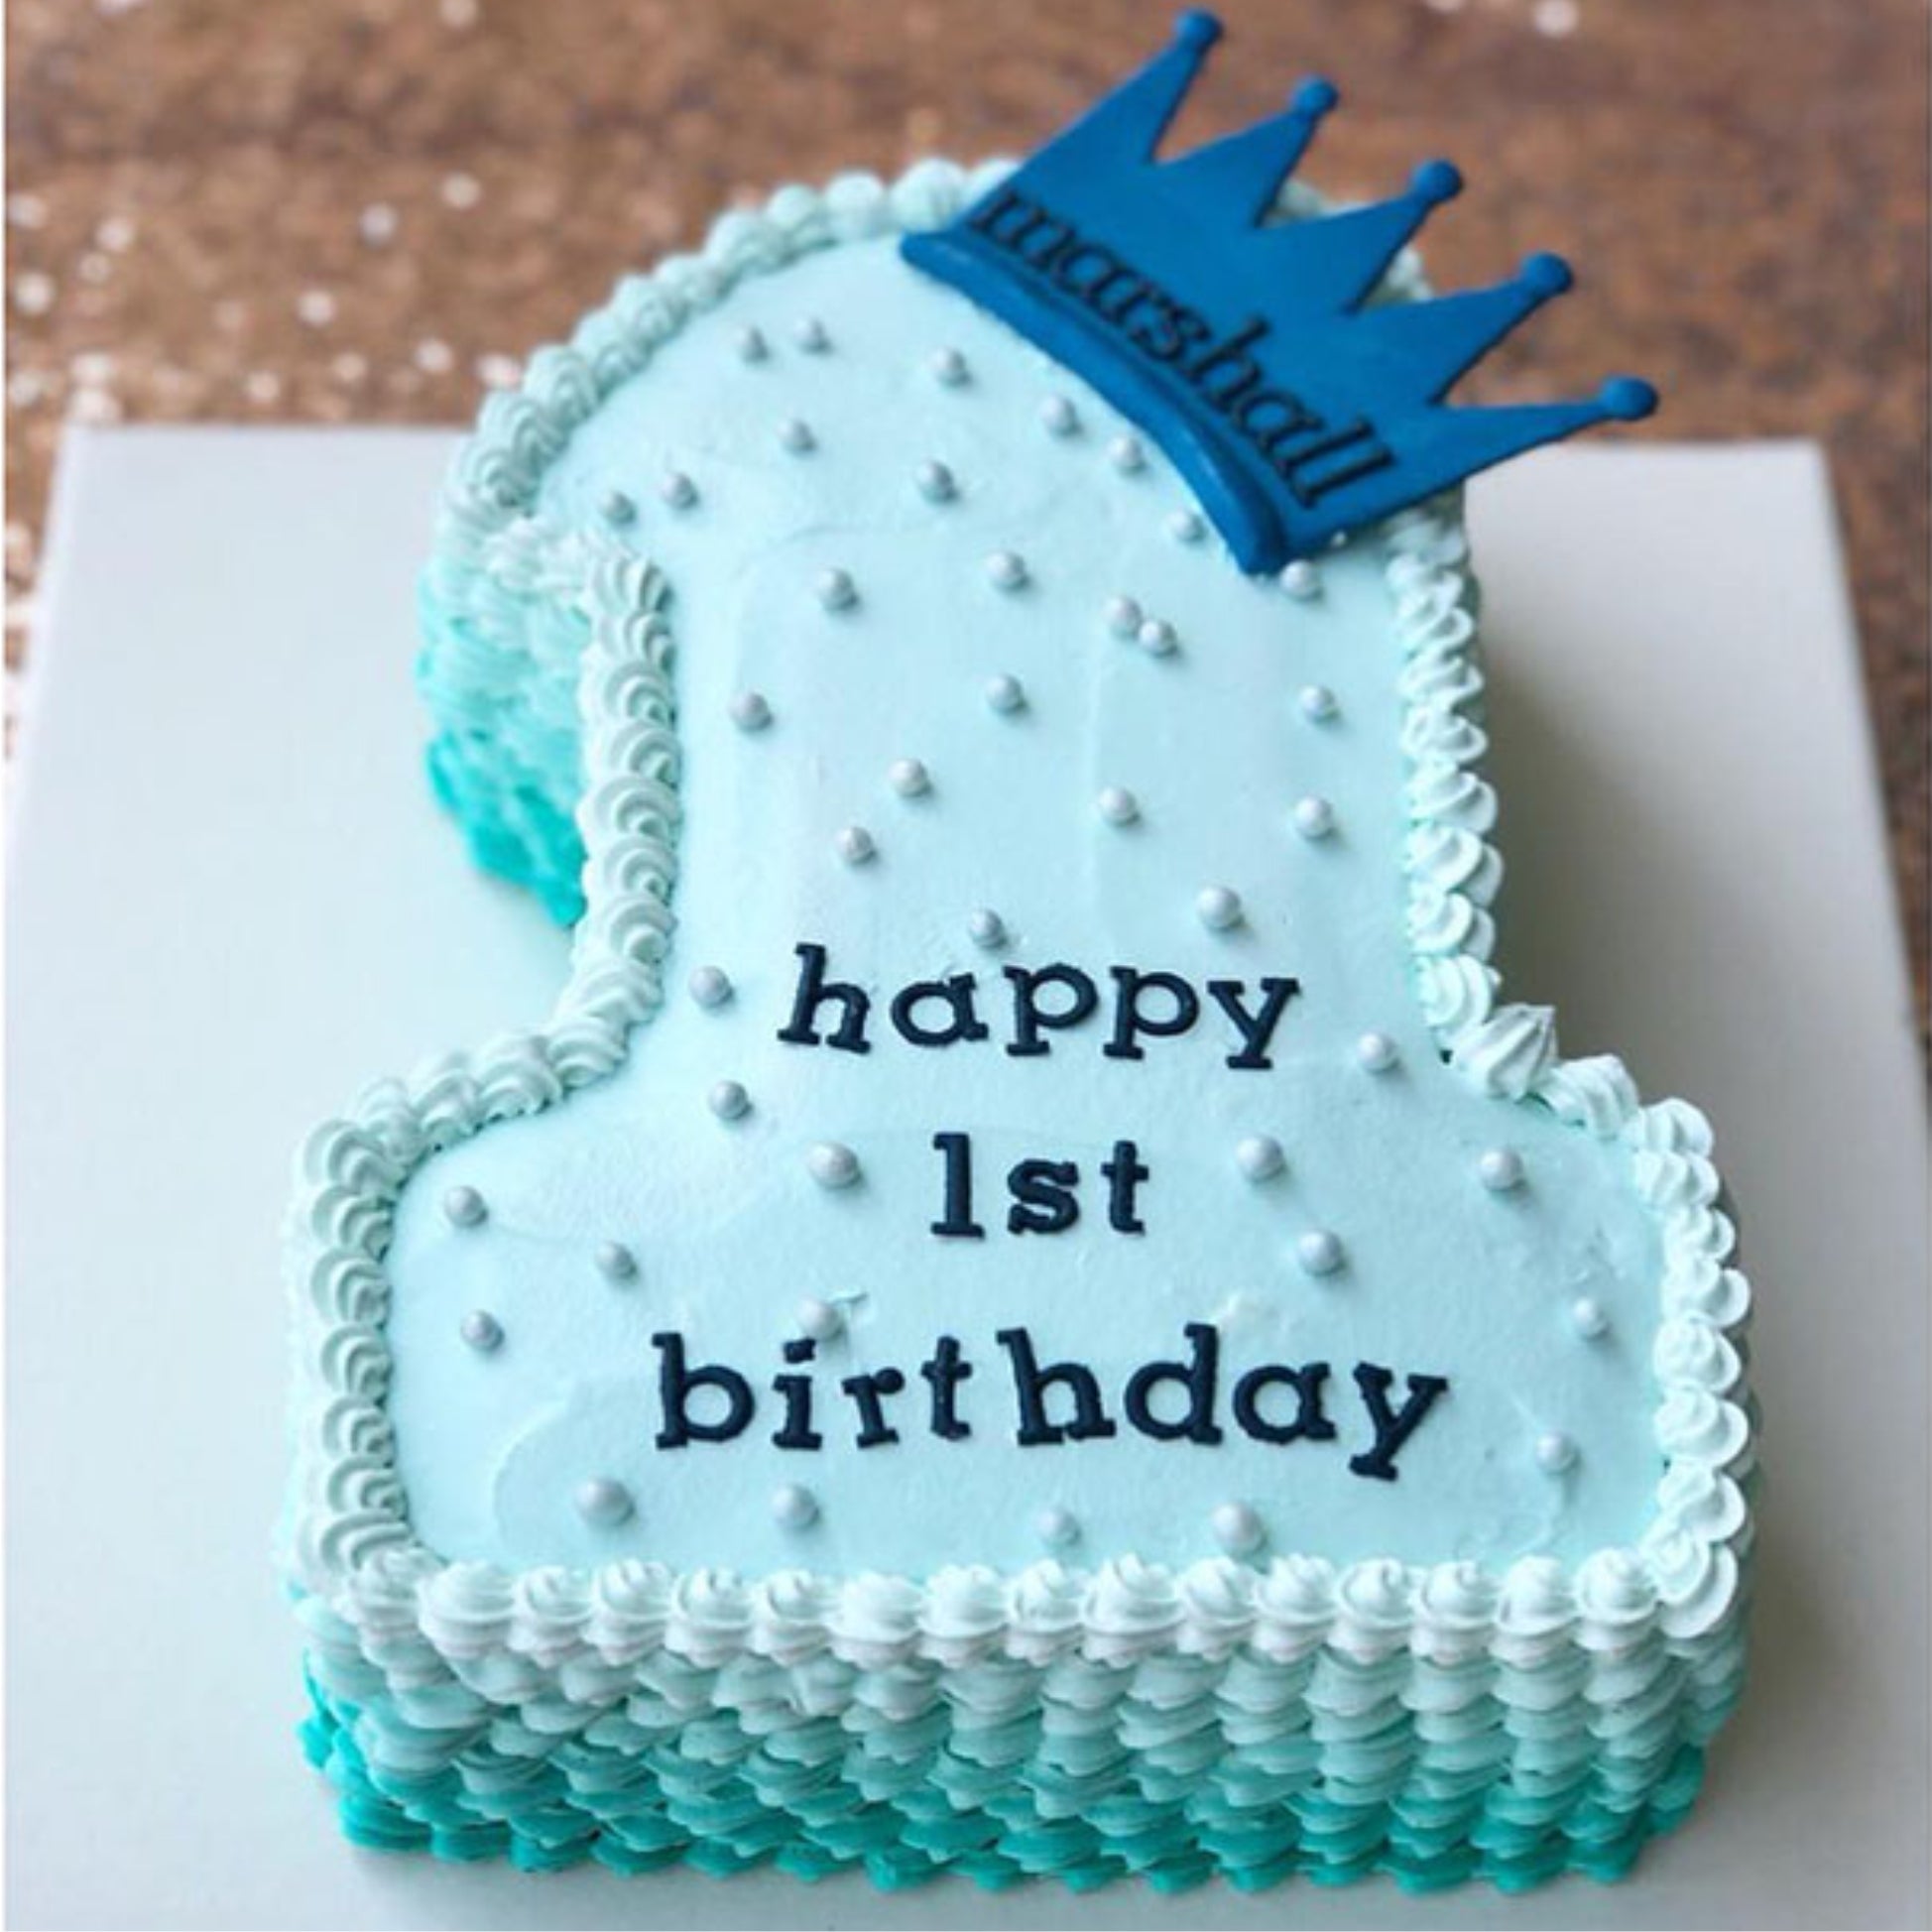 Fancy Buttercream Birthday Cake | Candy's Cupcakes